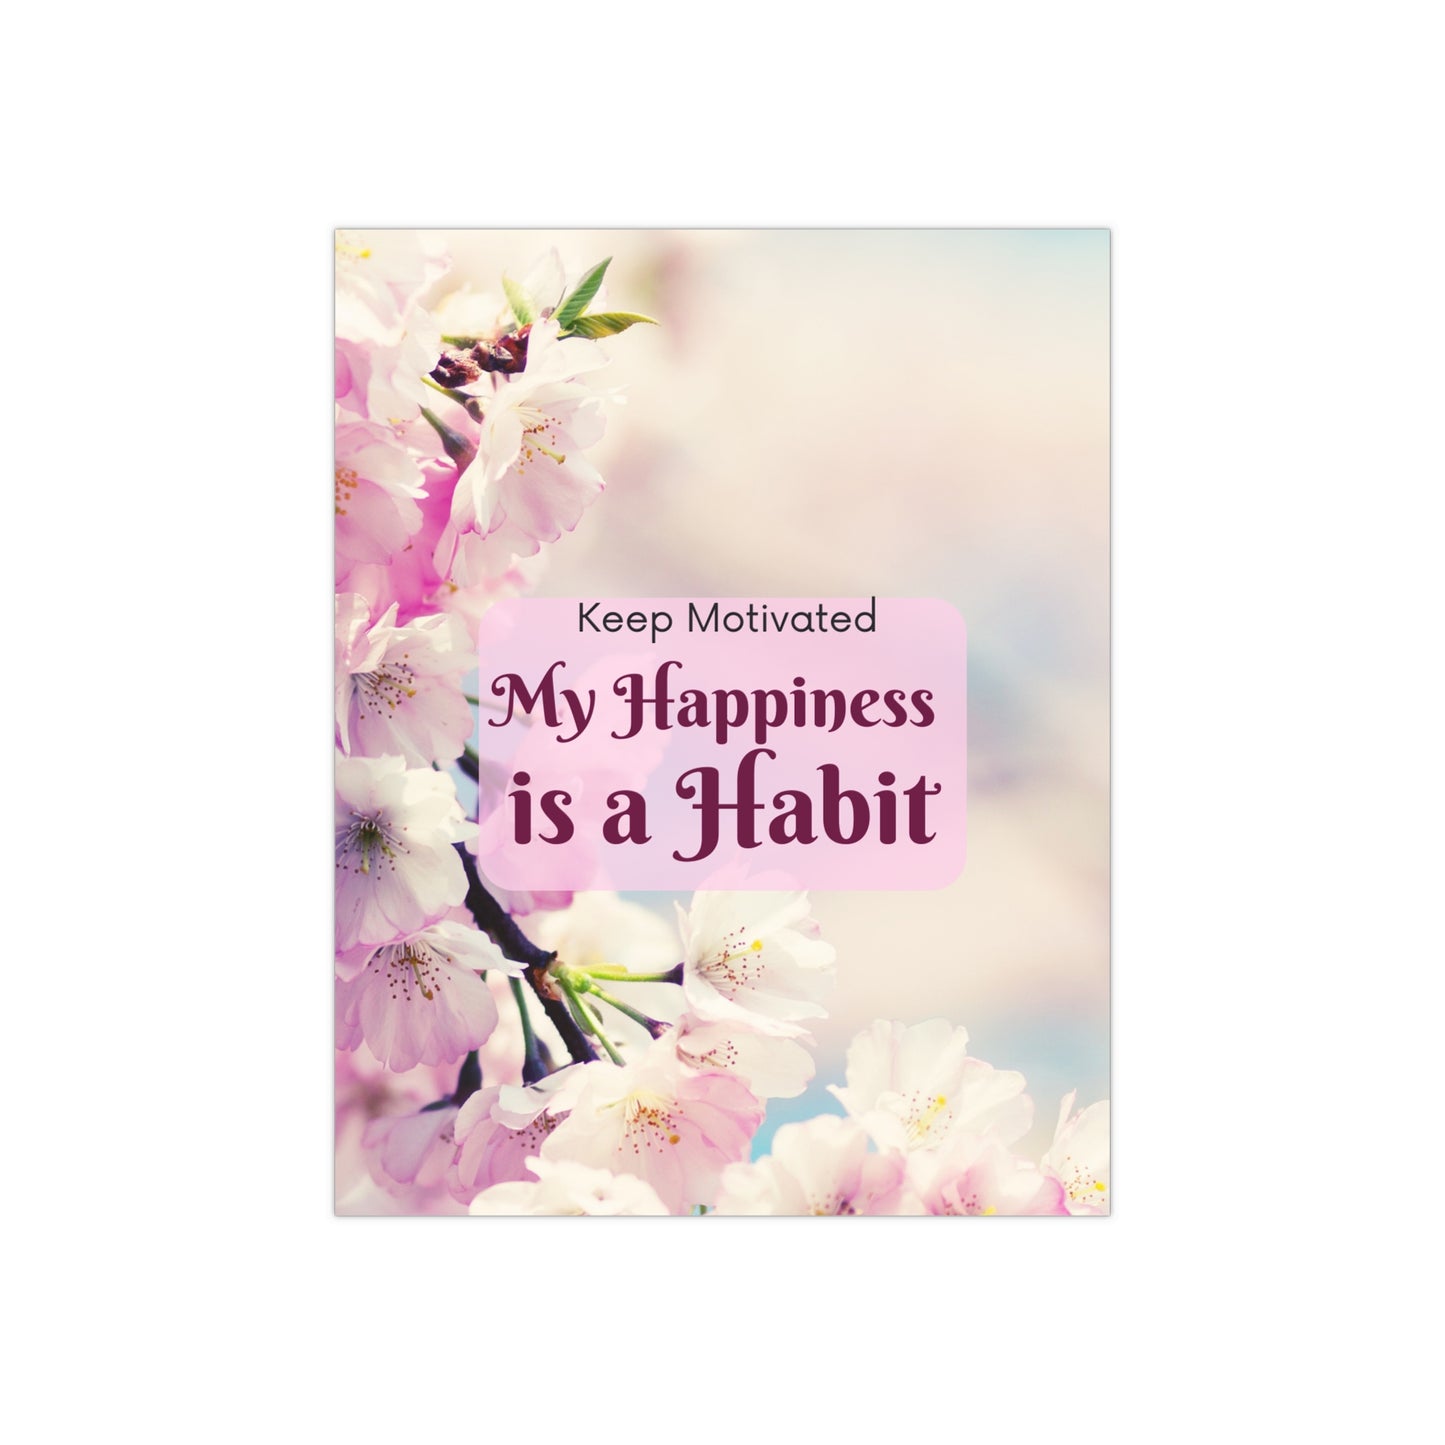 PoM's series of Mindfulness & Self-Motivation .... "My Happyness is a Habit" (V2) ... Self affirmation poster (Satin paper, 300gsm, 6 sizes)